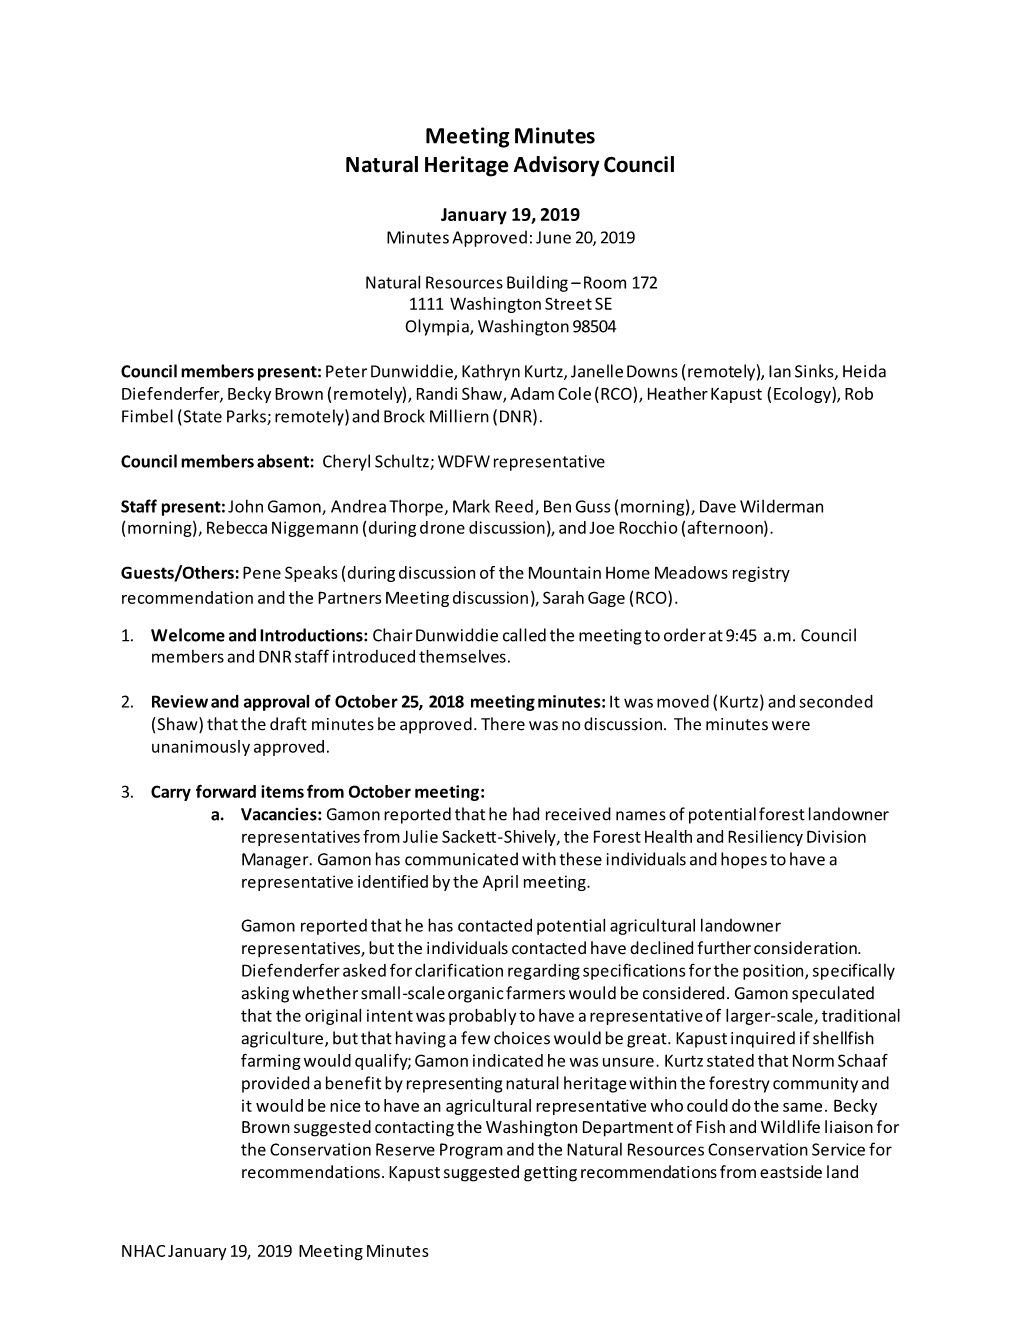 Meeting Minutes Natural Heritage Advisory Council